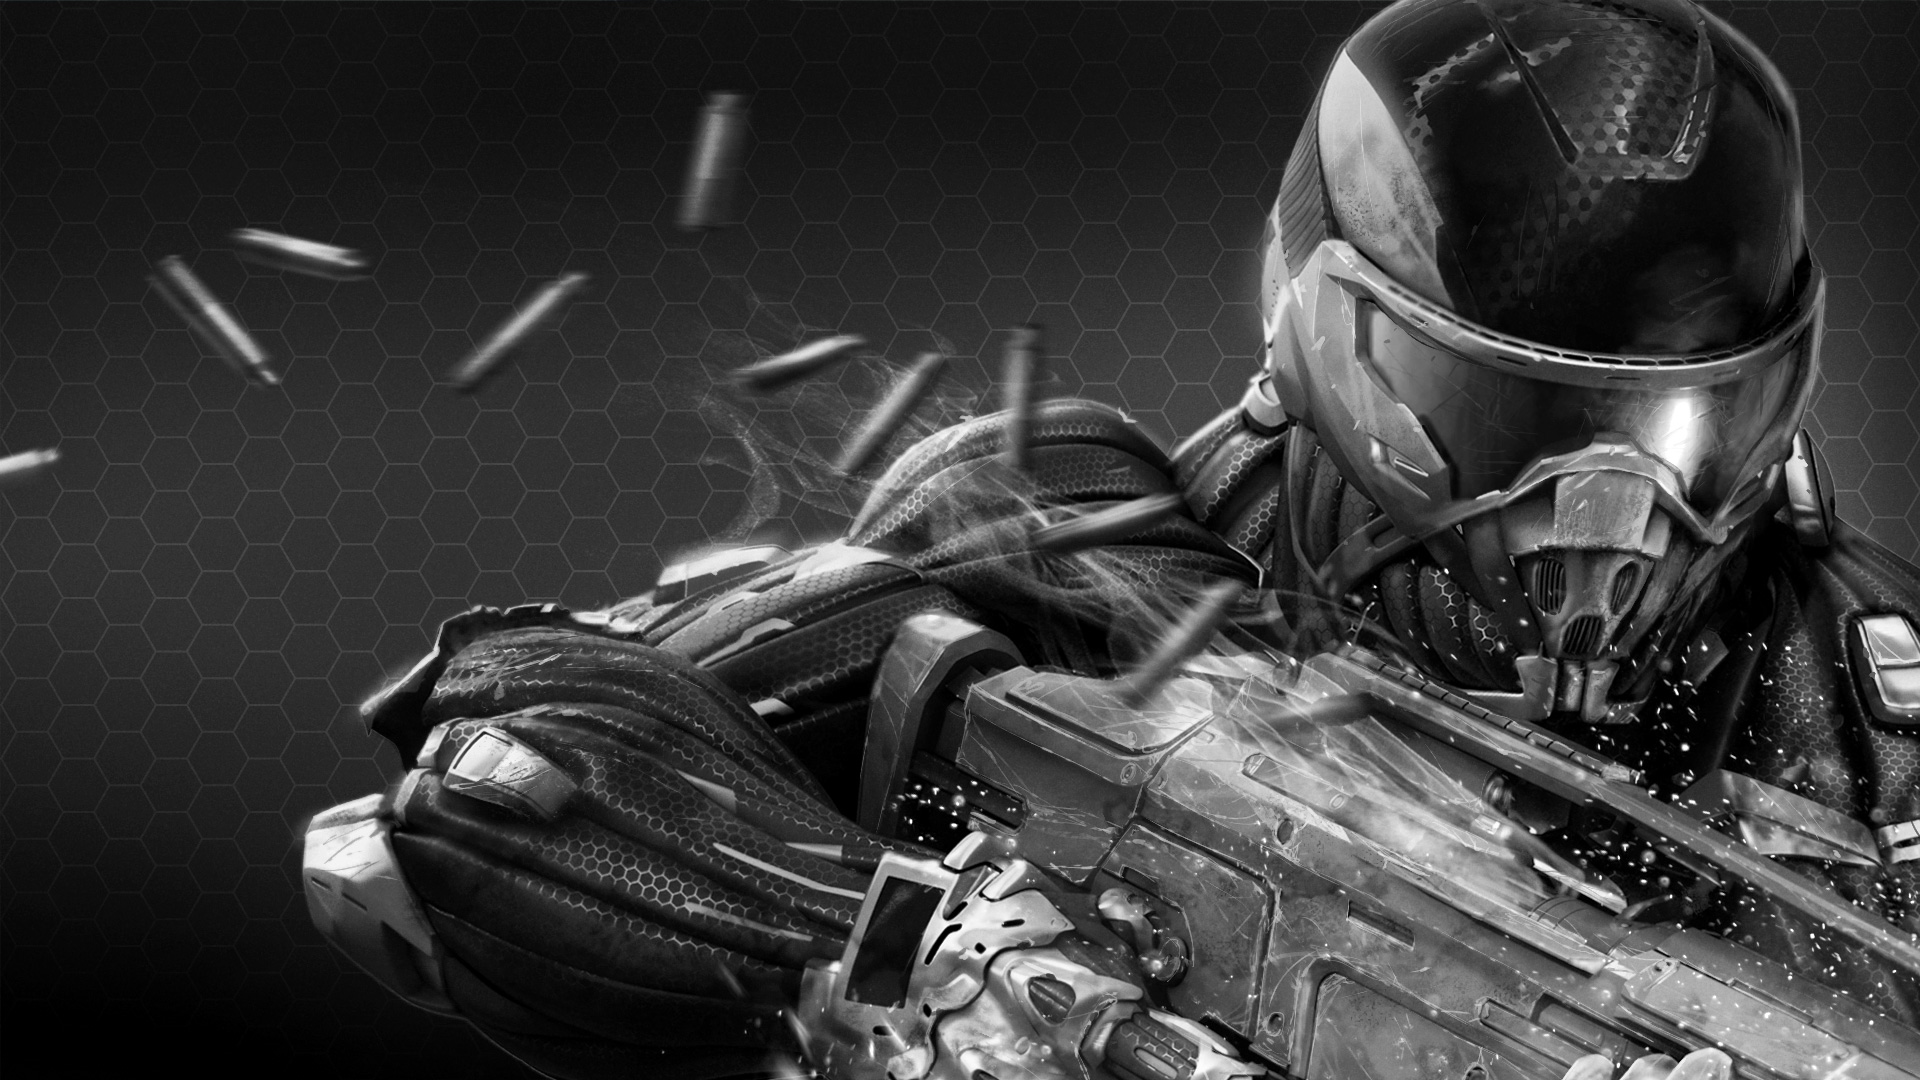 General 1920x1080 Crysis 2 video games monochrome video game art